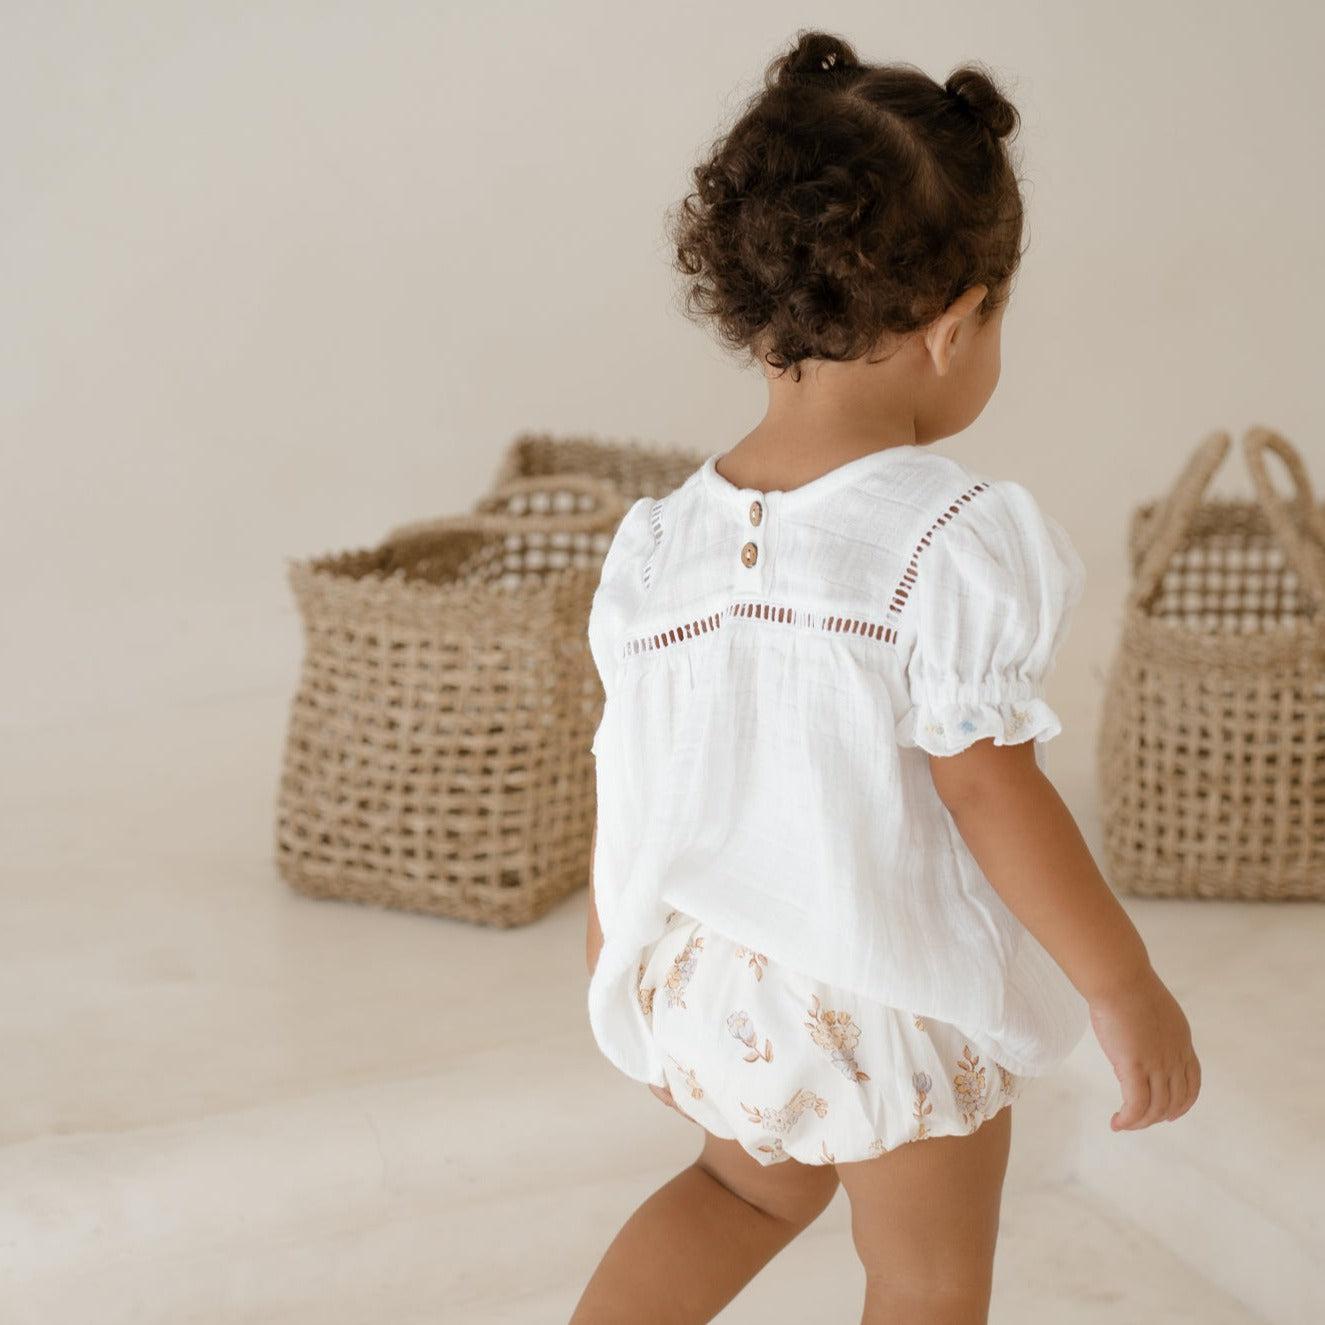 A little girl wearing a vintage-inspired Illoura the Label clover blouse & bloomer set and carrying a basket.